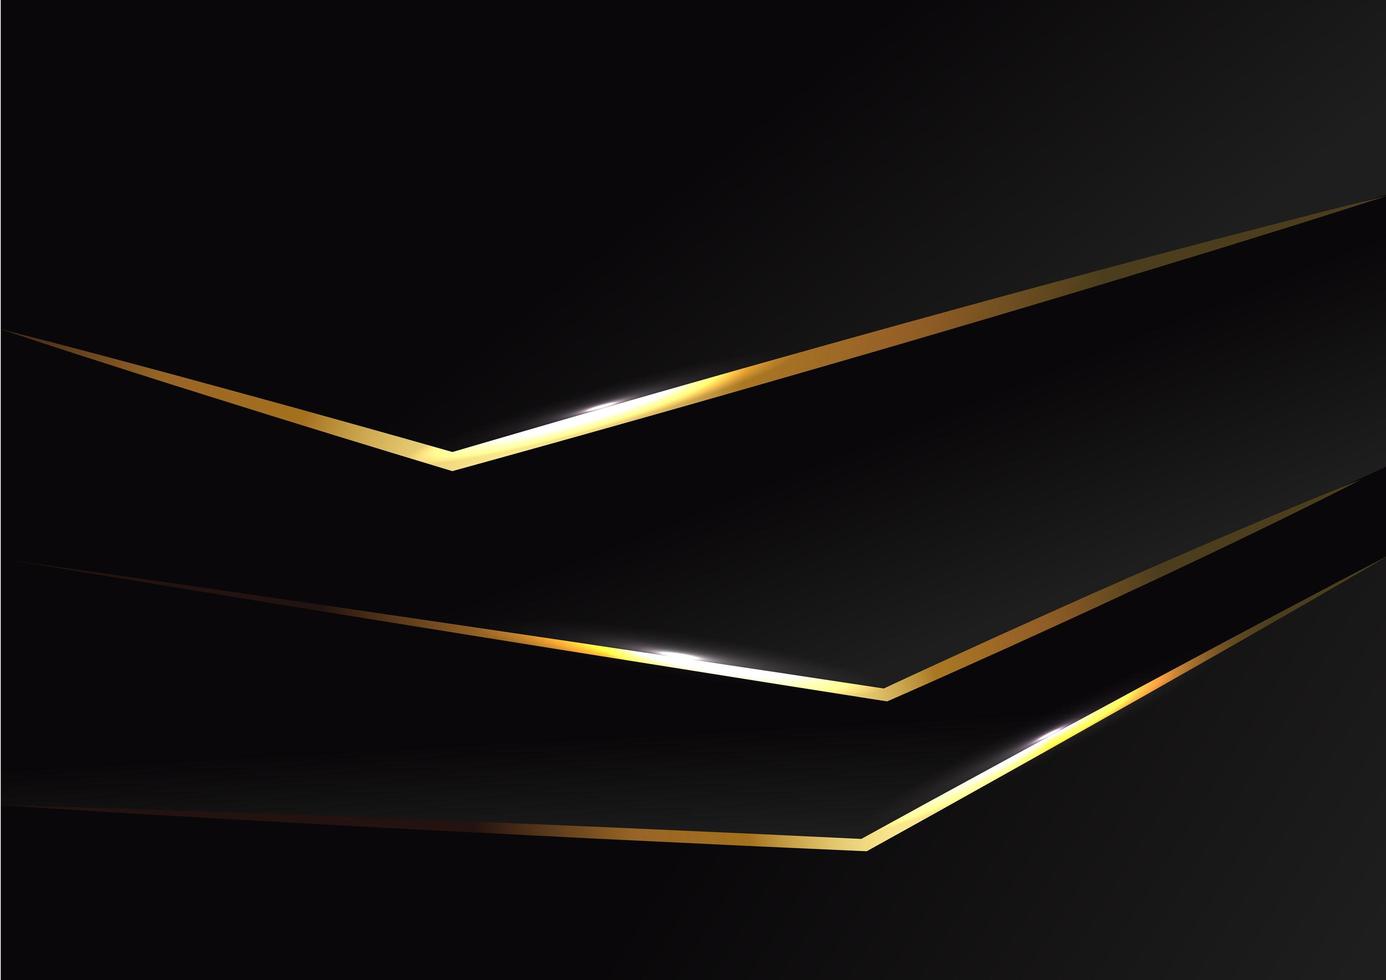 Abstract template with gold and black elements vector